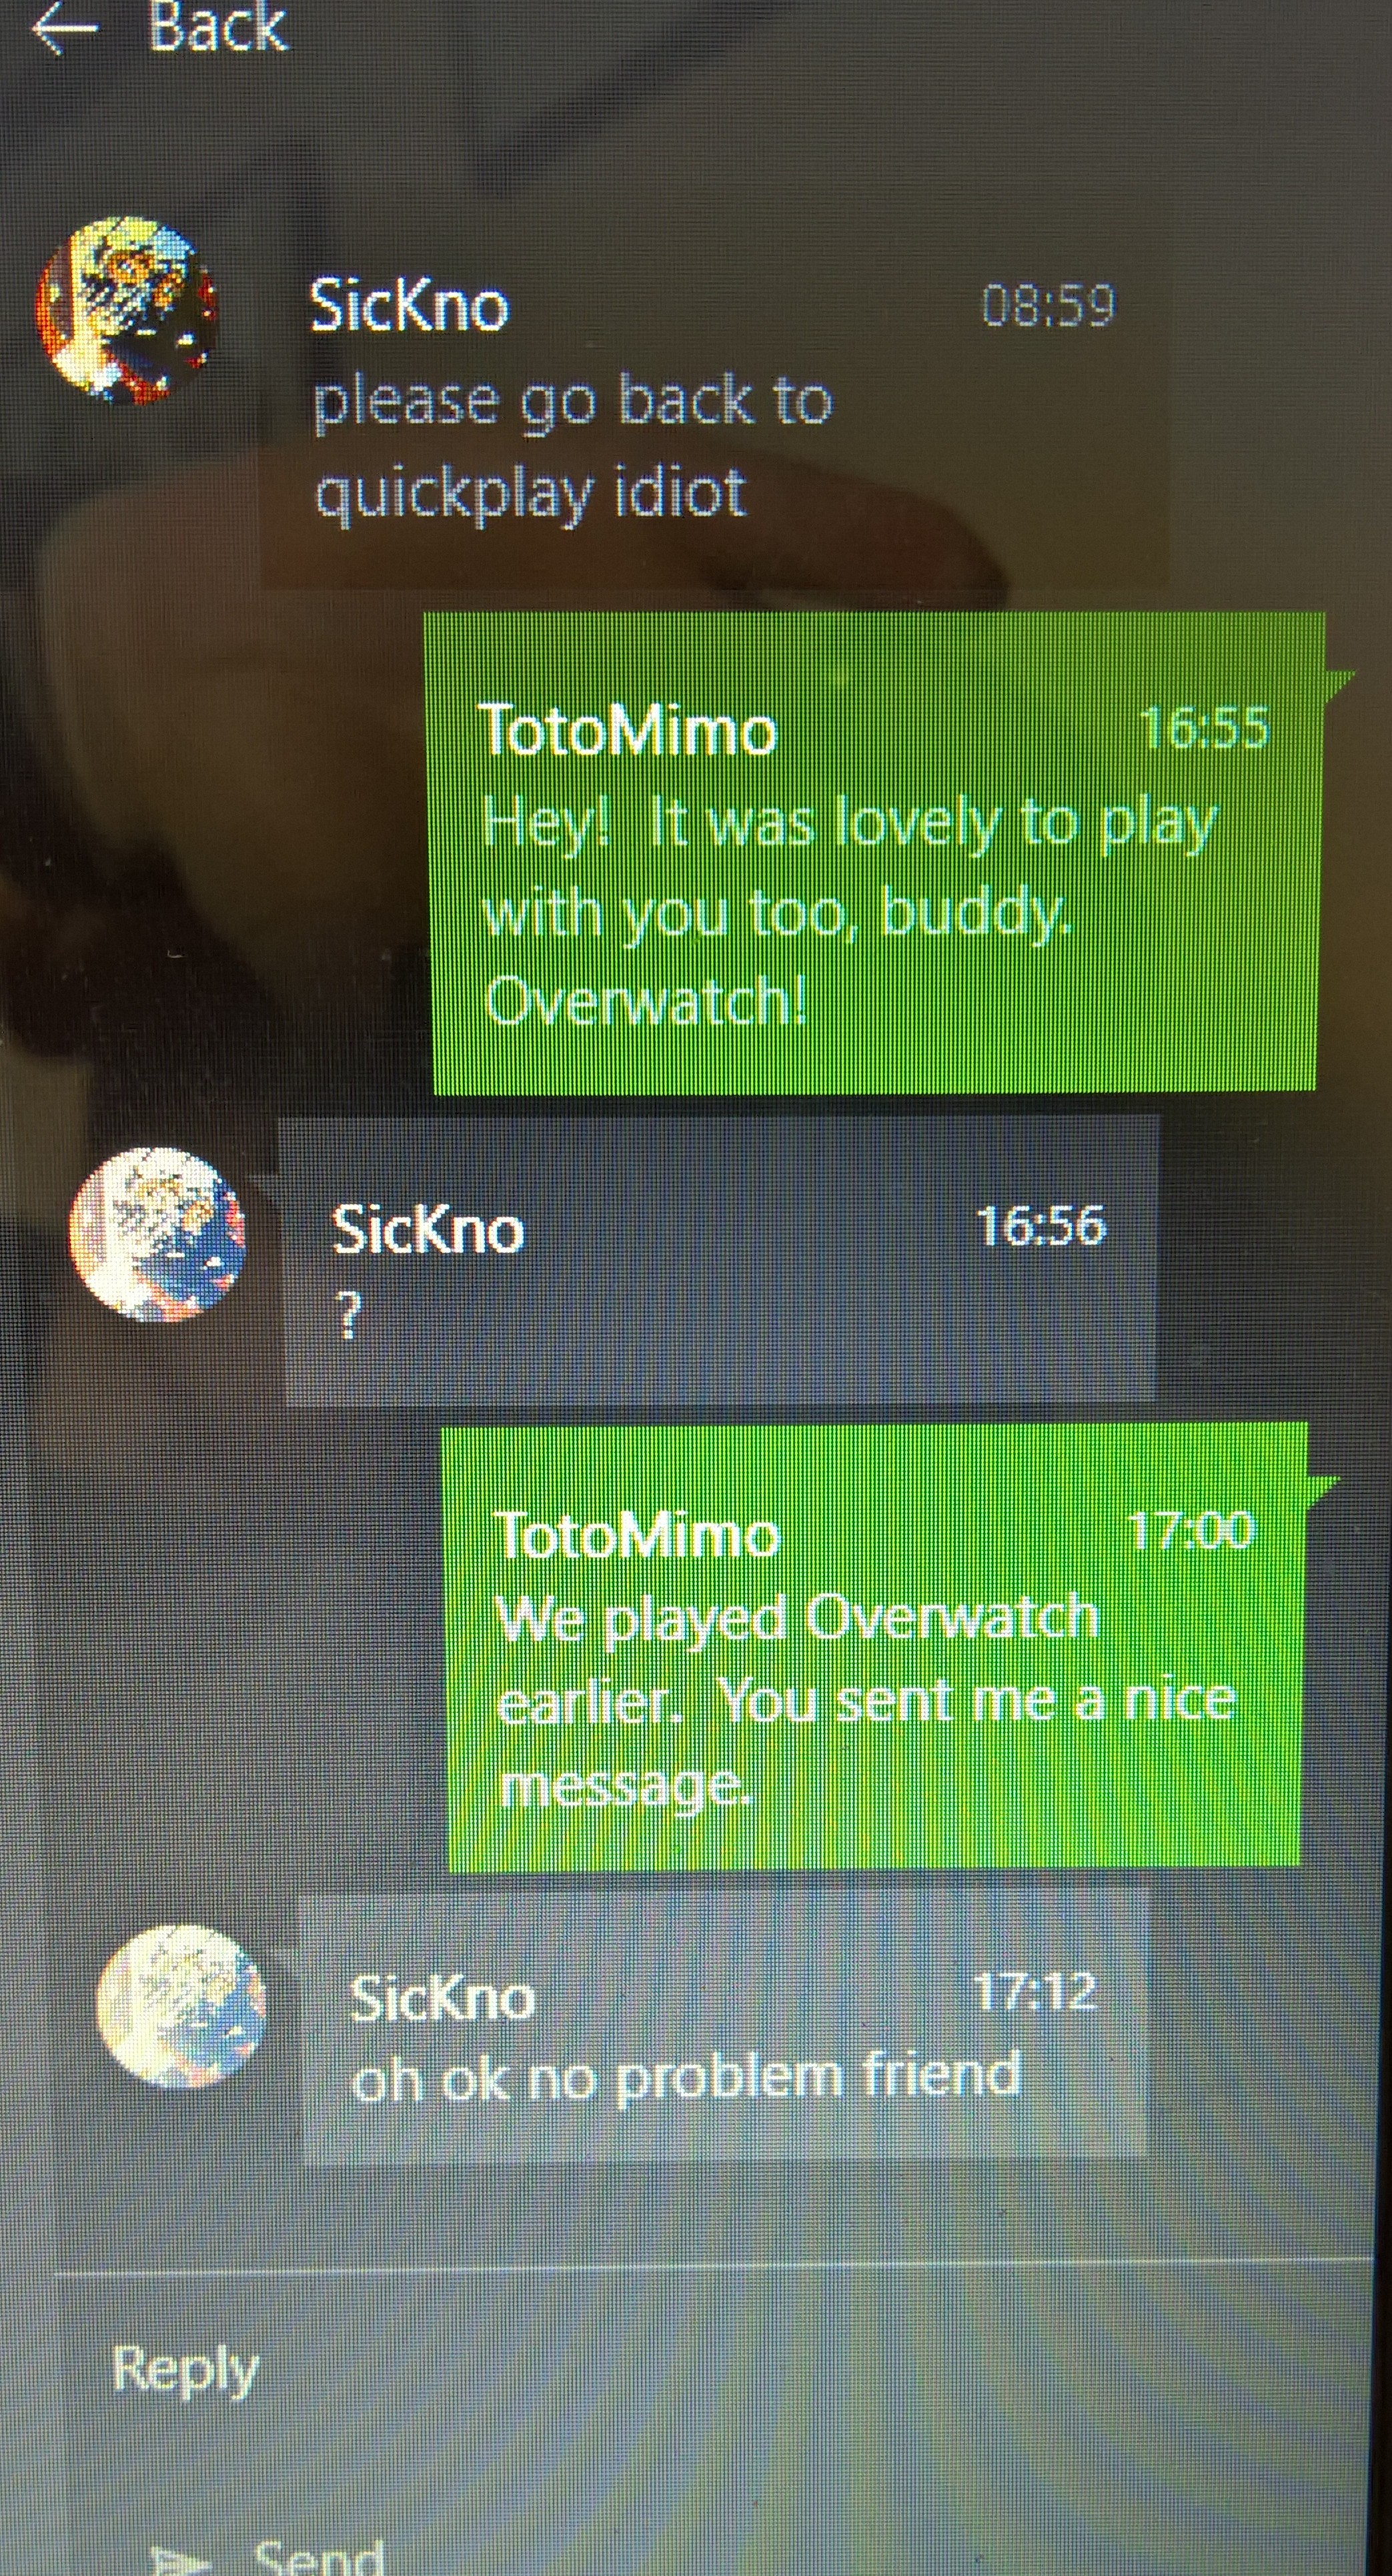 screenshot - Back Sickno please go back to quickplay idiot Toto Mimo Hey! It was lovely to play with you too, buddy. Overwatch! Sickno Toto Mimo We played Overwatch earlier. You sent me a nice massage Sickno oh ok no problem friend Sand